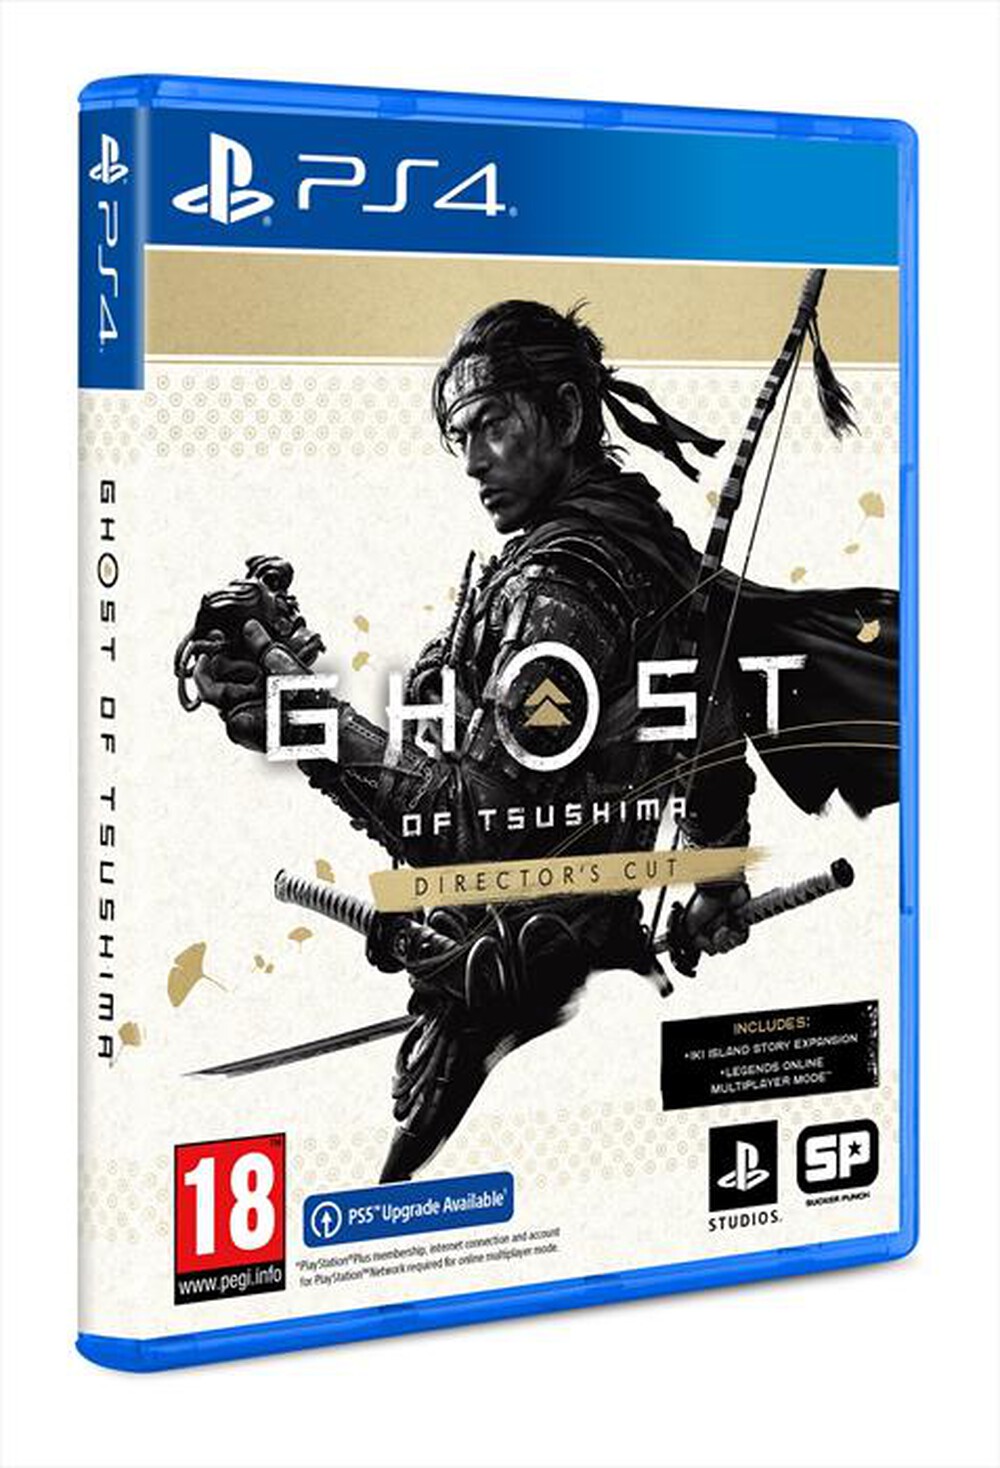 "SONY COMPUTER - GHOST OF TSUSHIMA DIRECTOR’S CUT PS4"